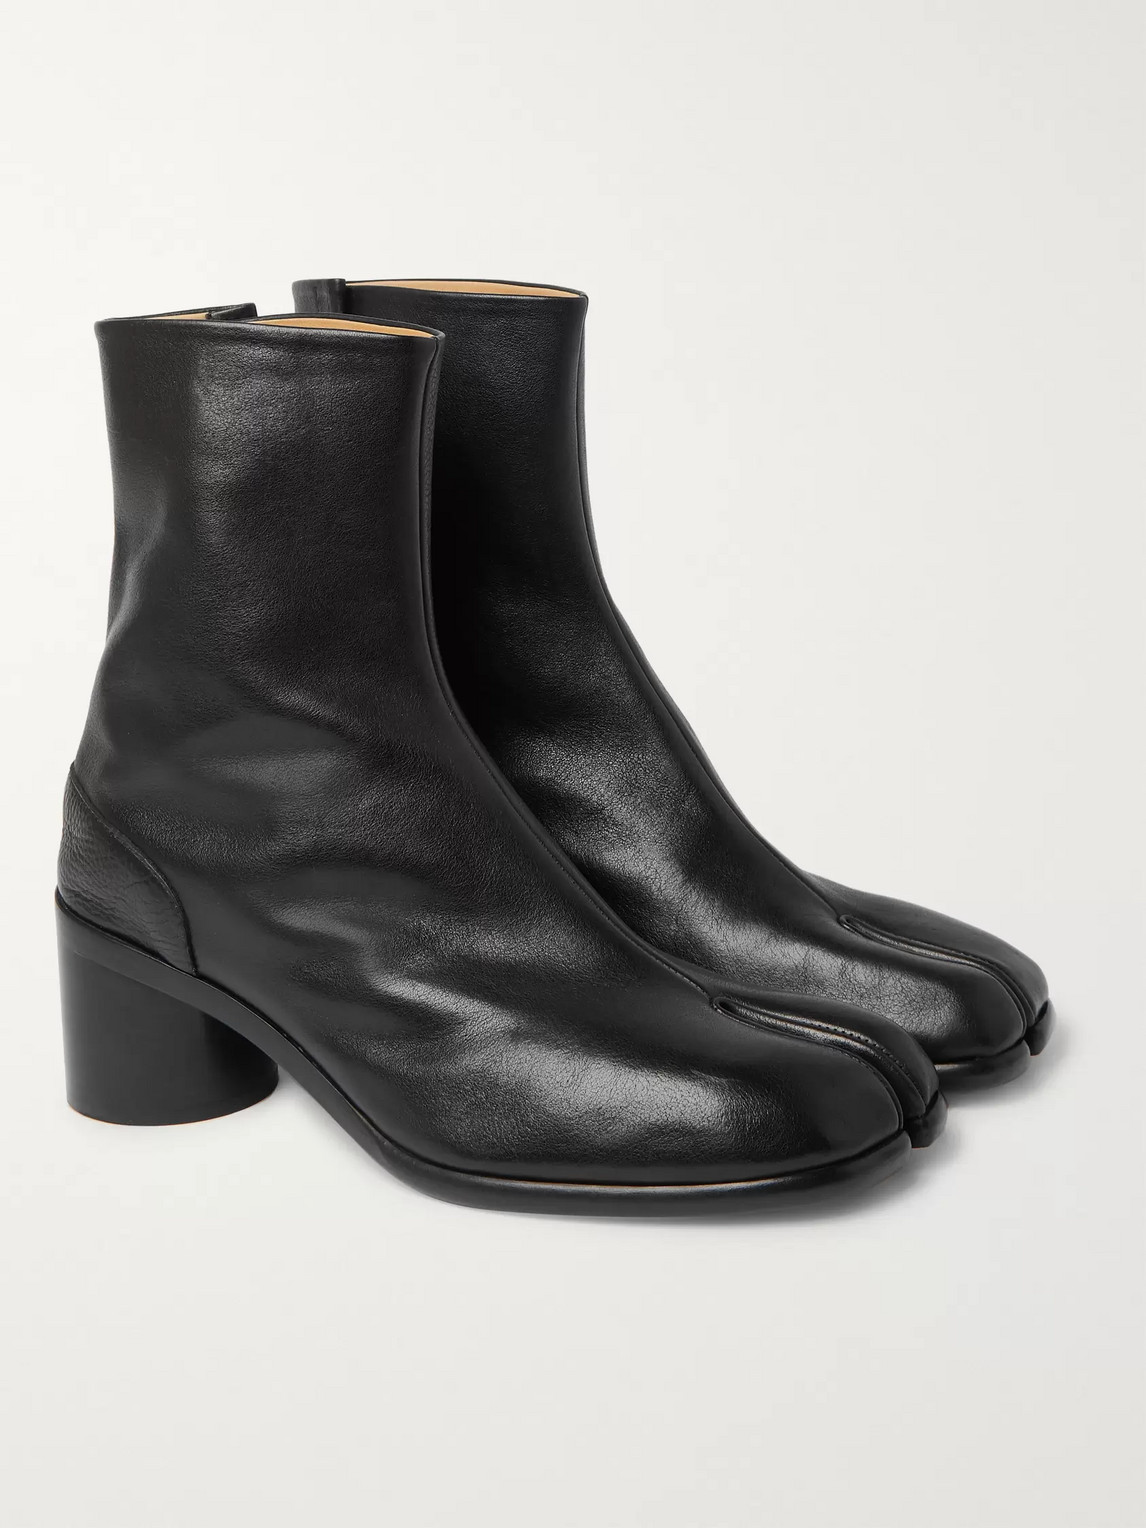 Maison Margiela Tabi Low Heels Ankle Boots In Black Leather | ModeSens